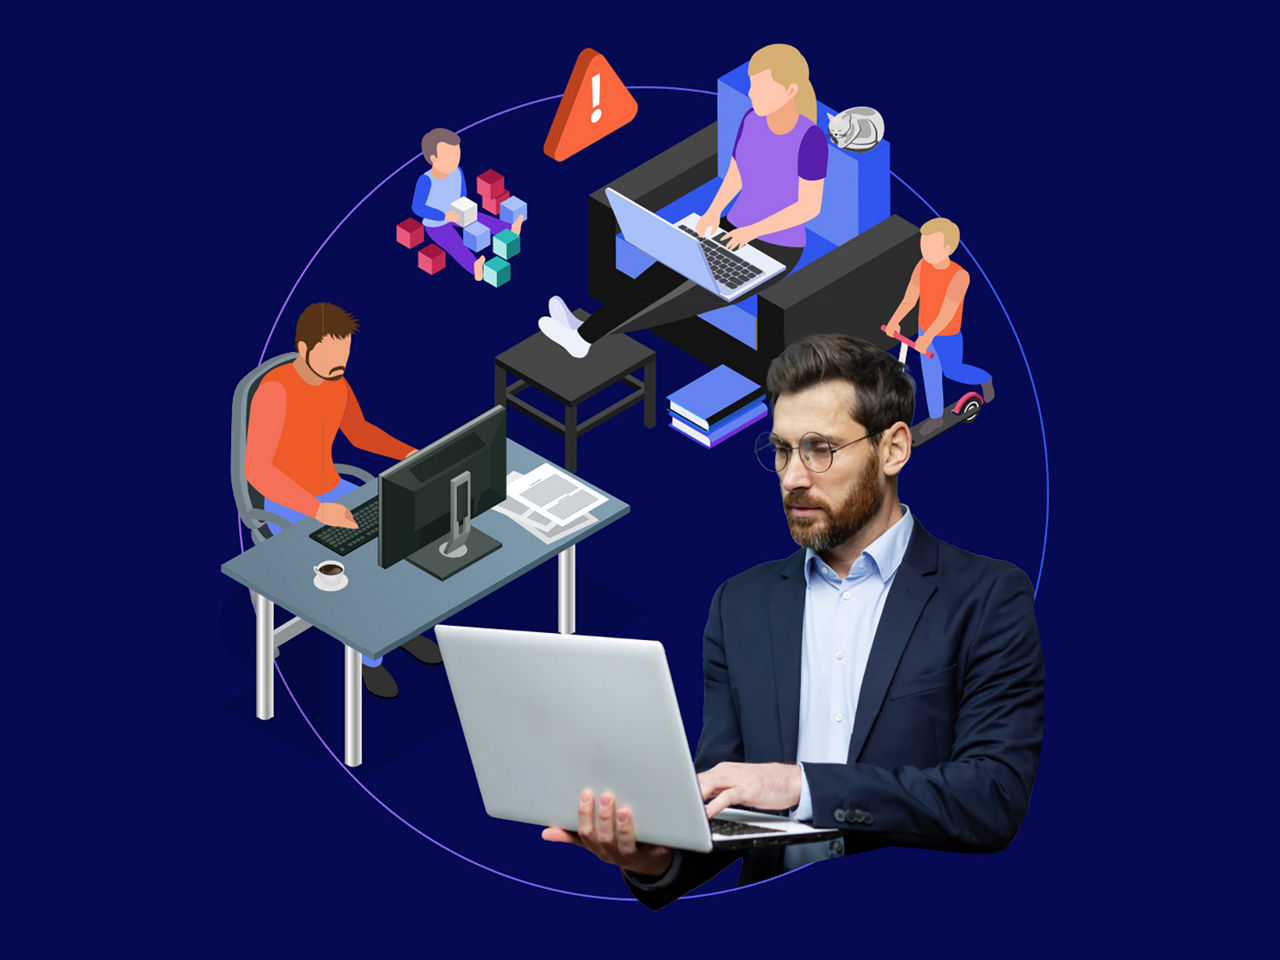 Illustration showing people working remote